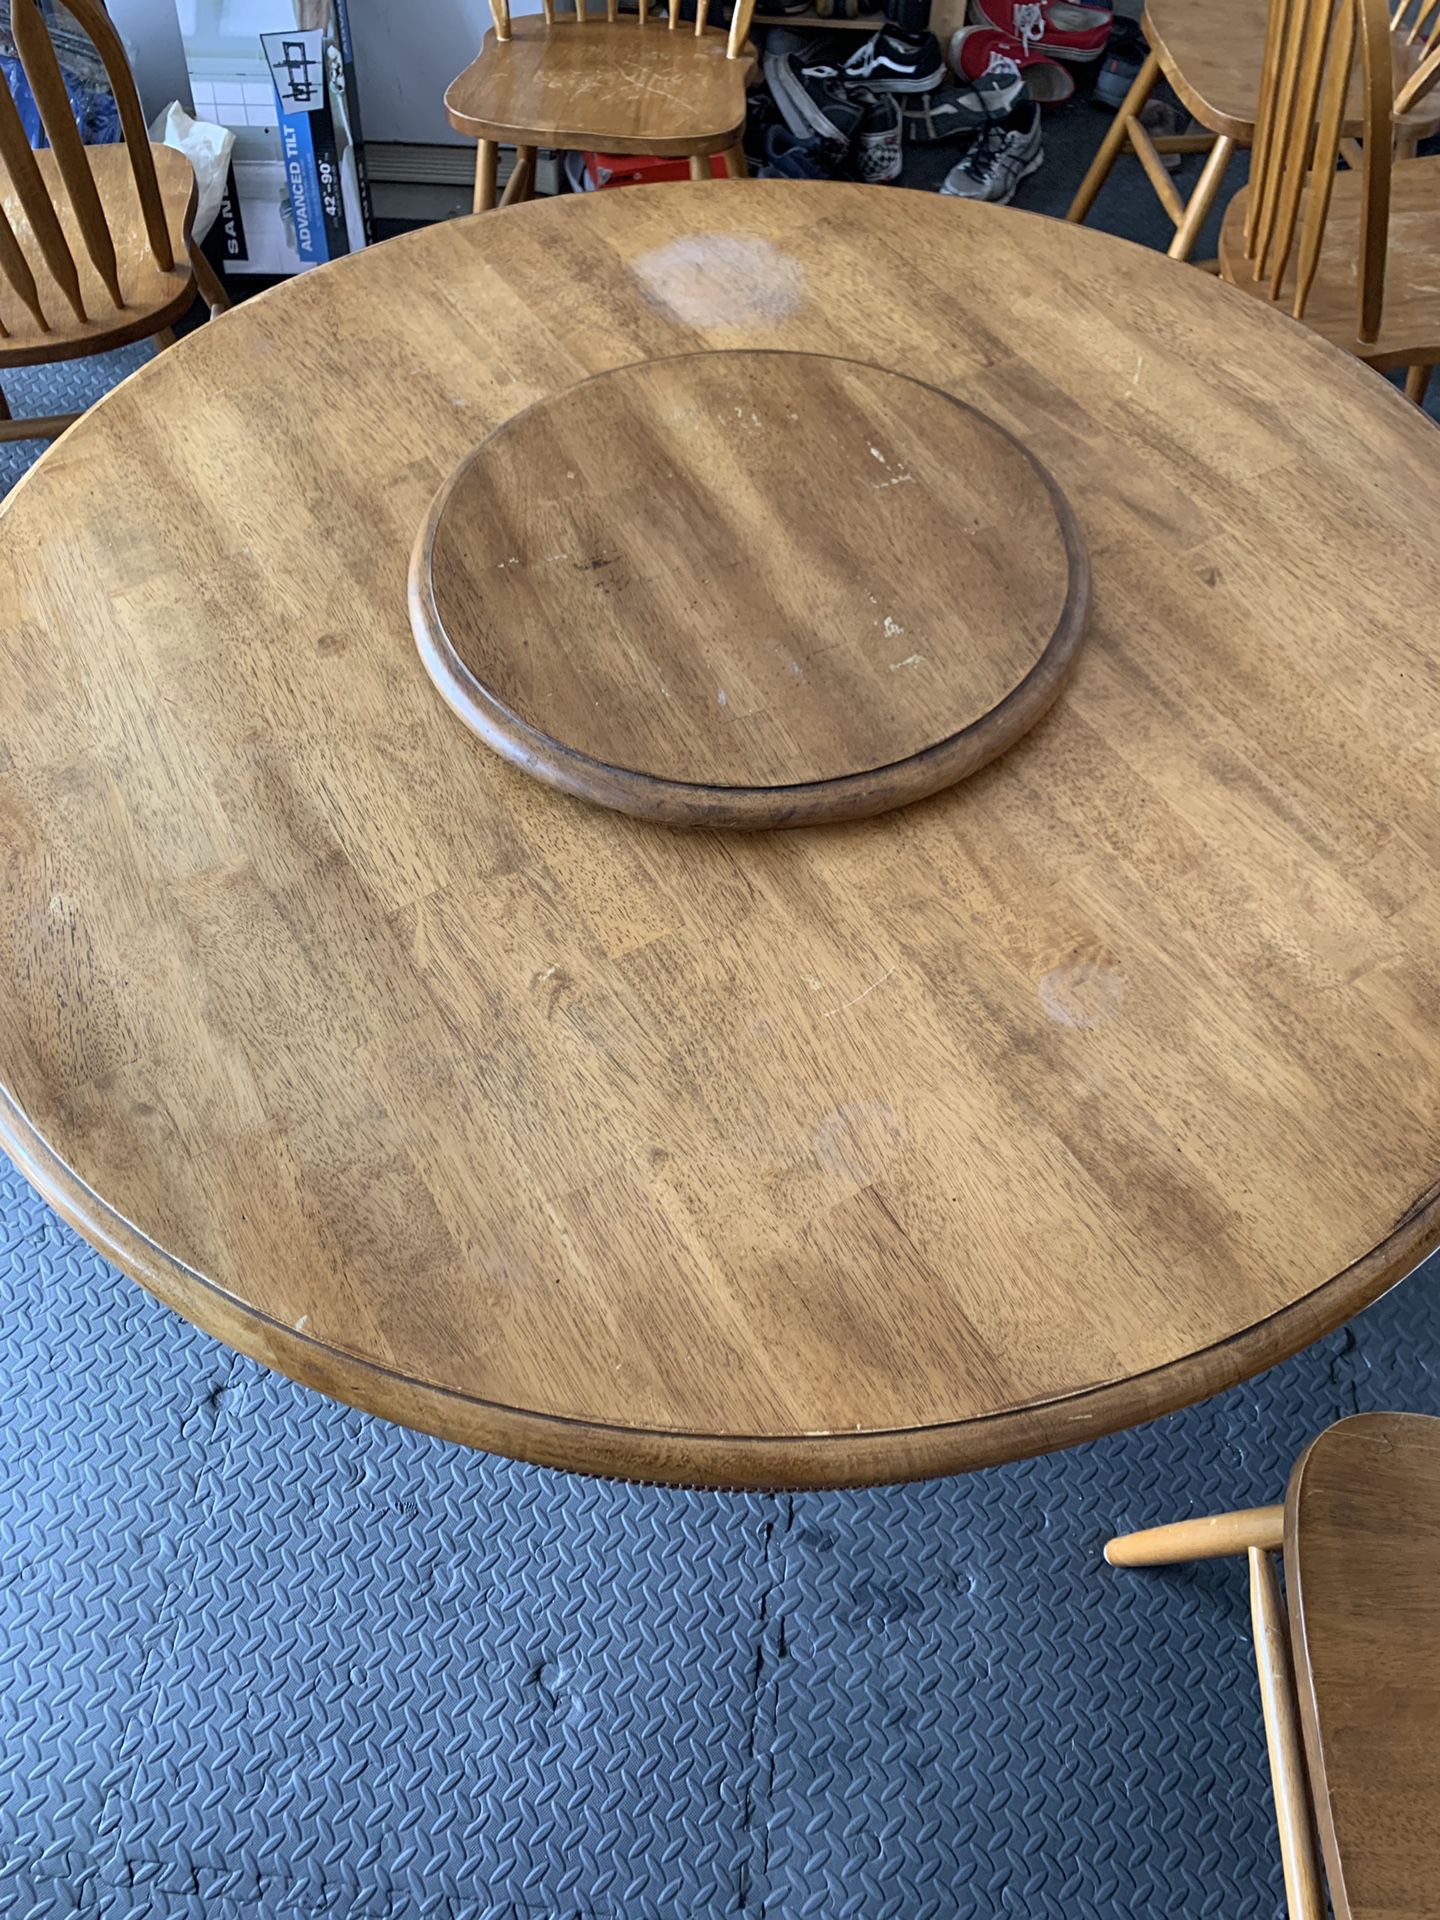 54” Kitchen Table w/ Lazy Susan - 4 chairs